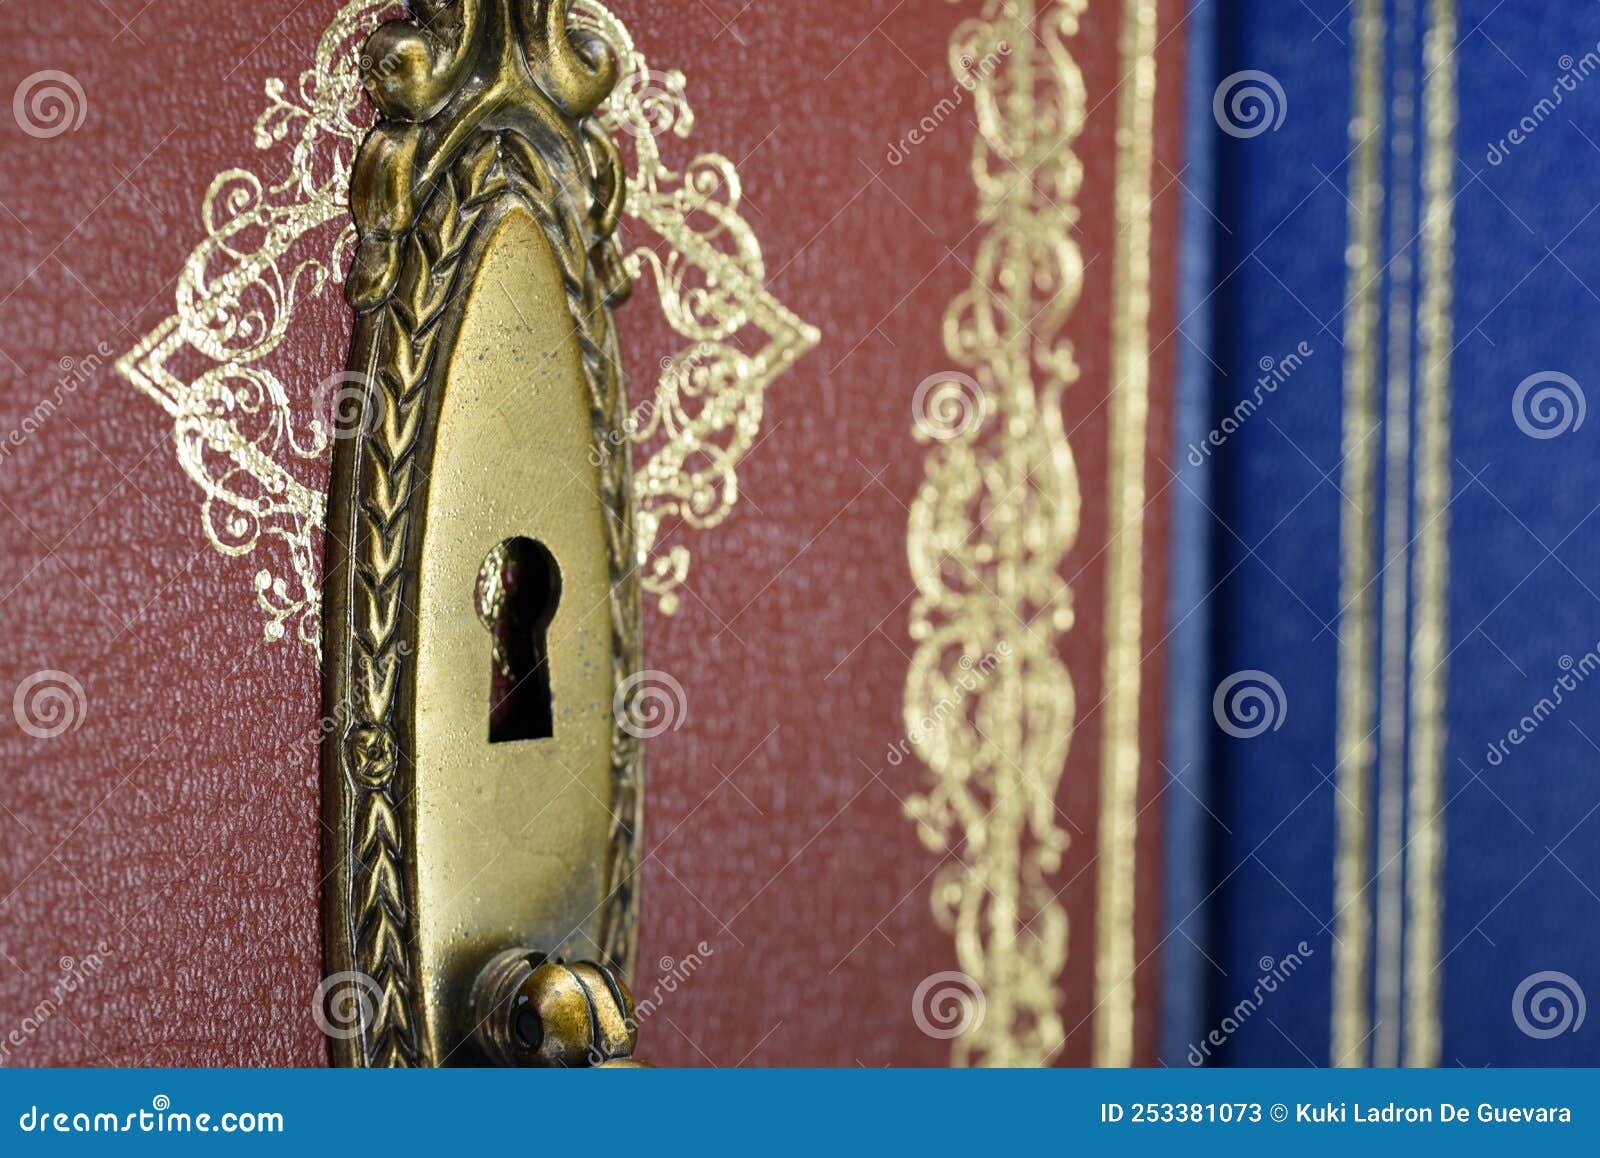 detail of a book with a lock on a shelf